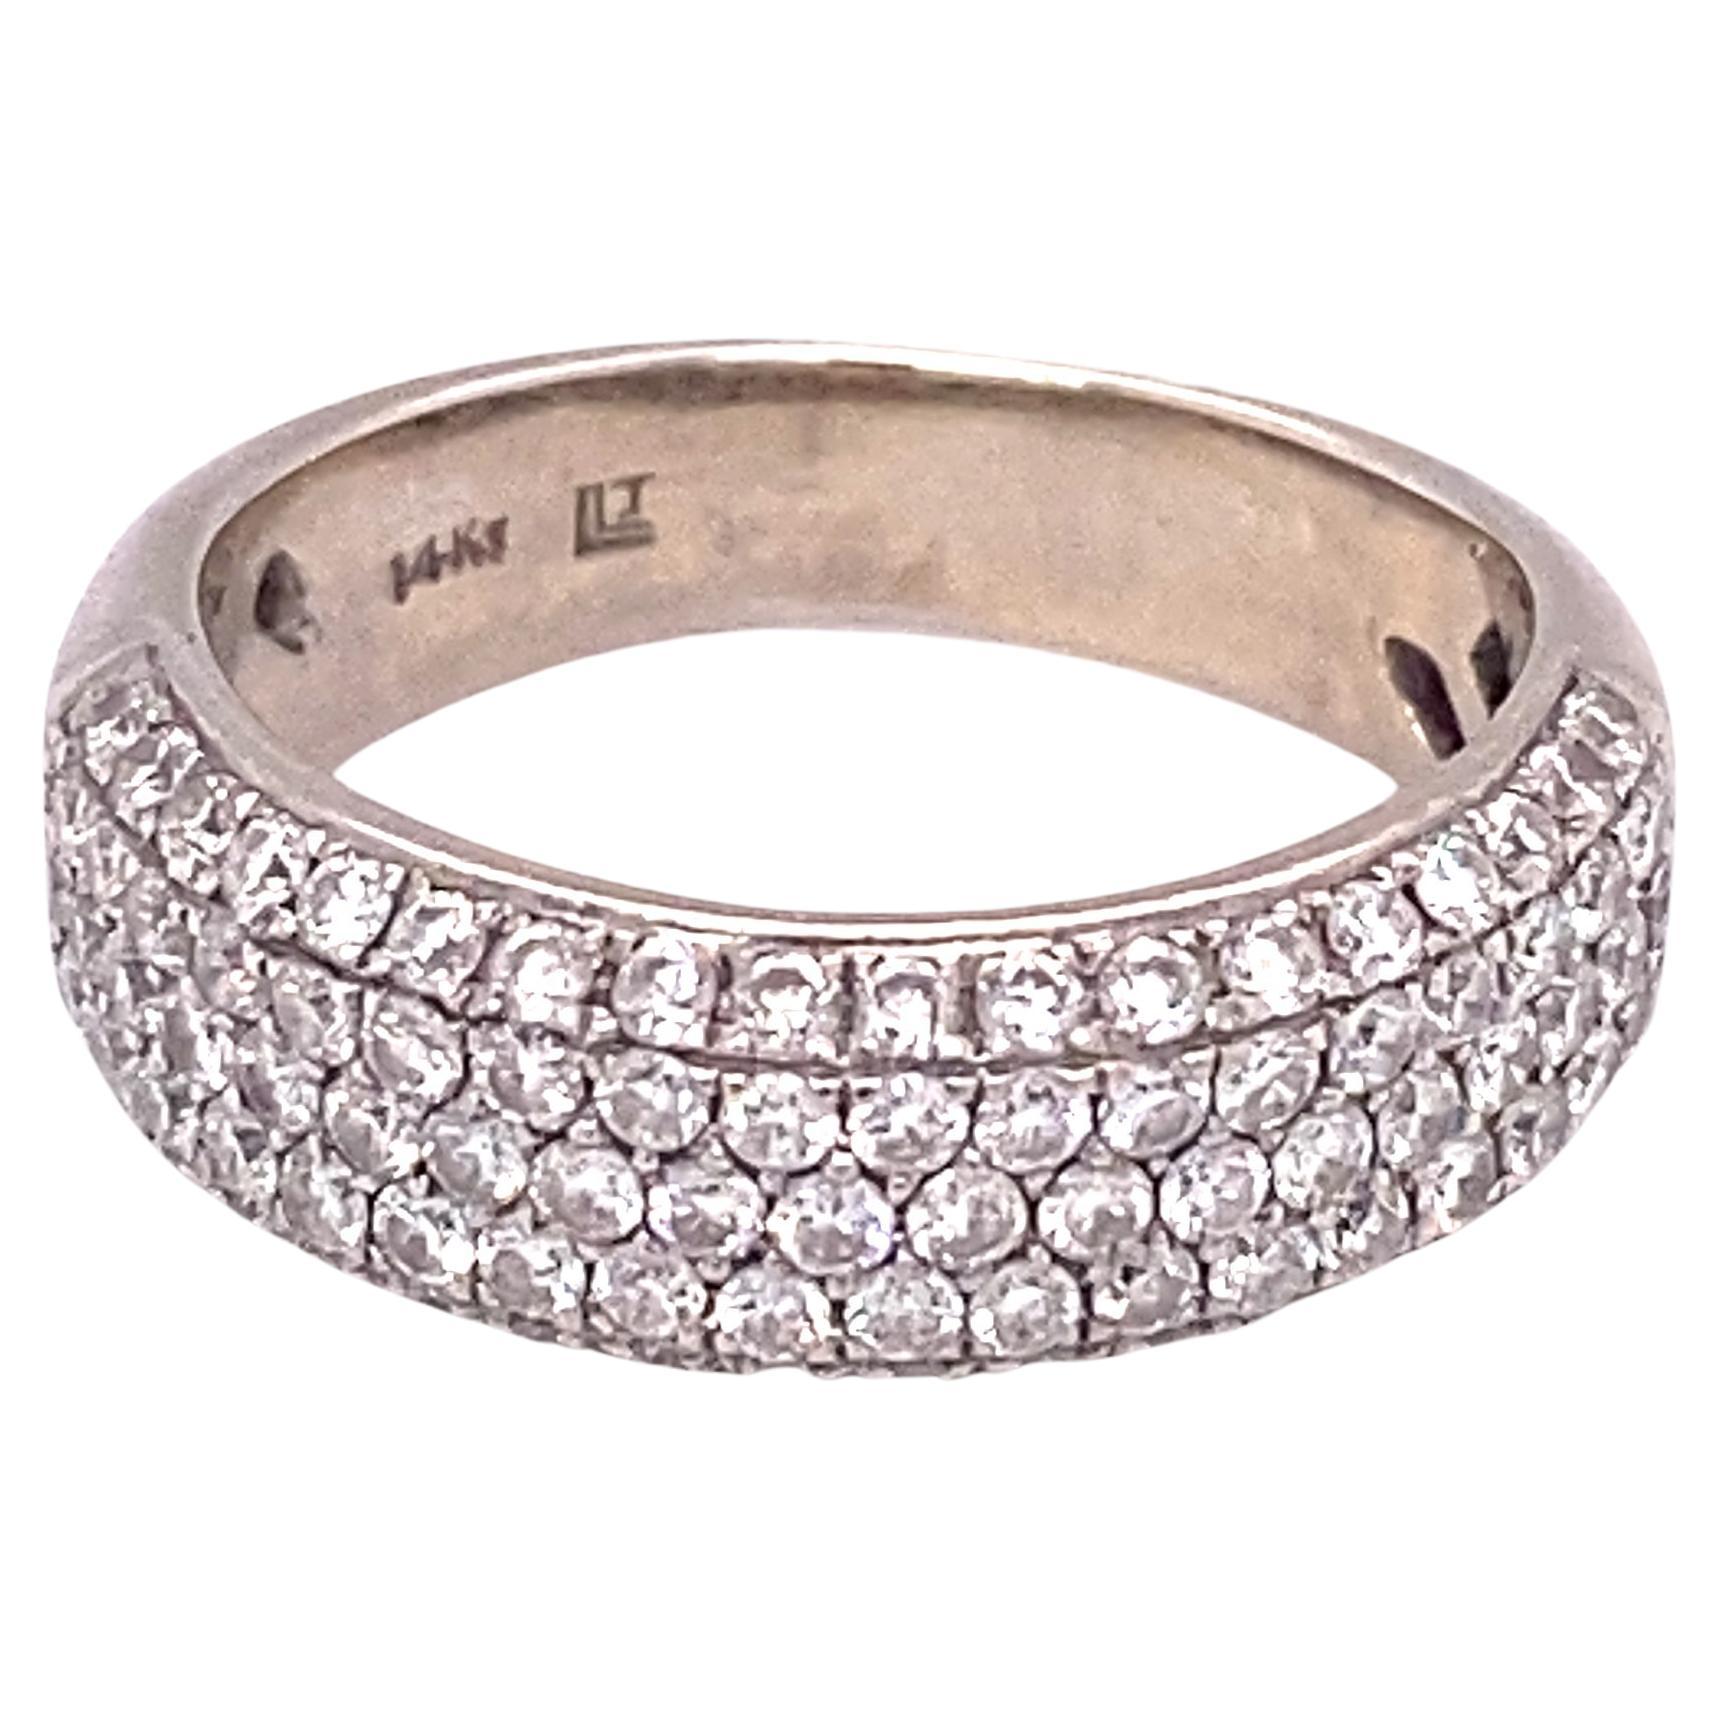 Circa 2000s 1.25 Carat Total Weight Diamond Five Row Band in 14 Karat White Gold For Sale